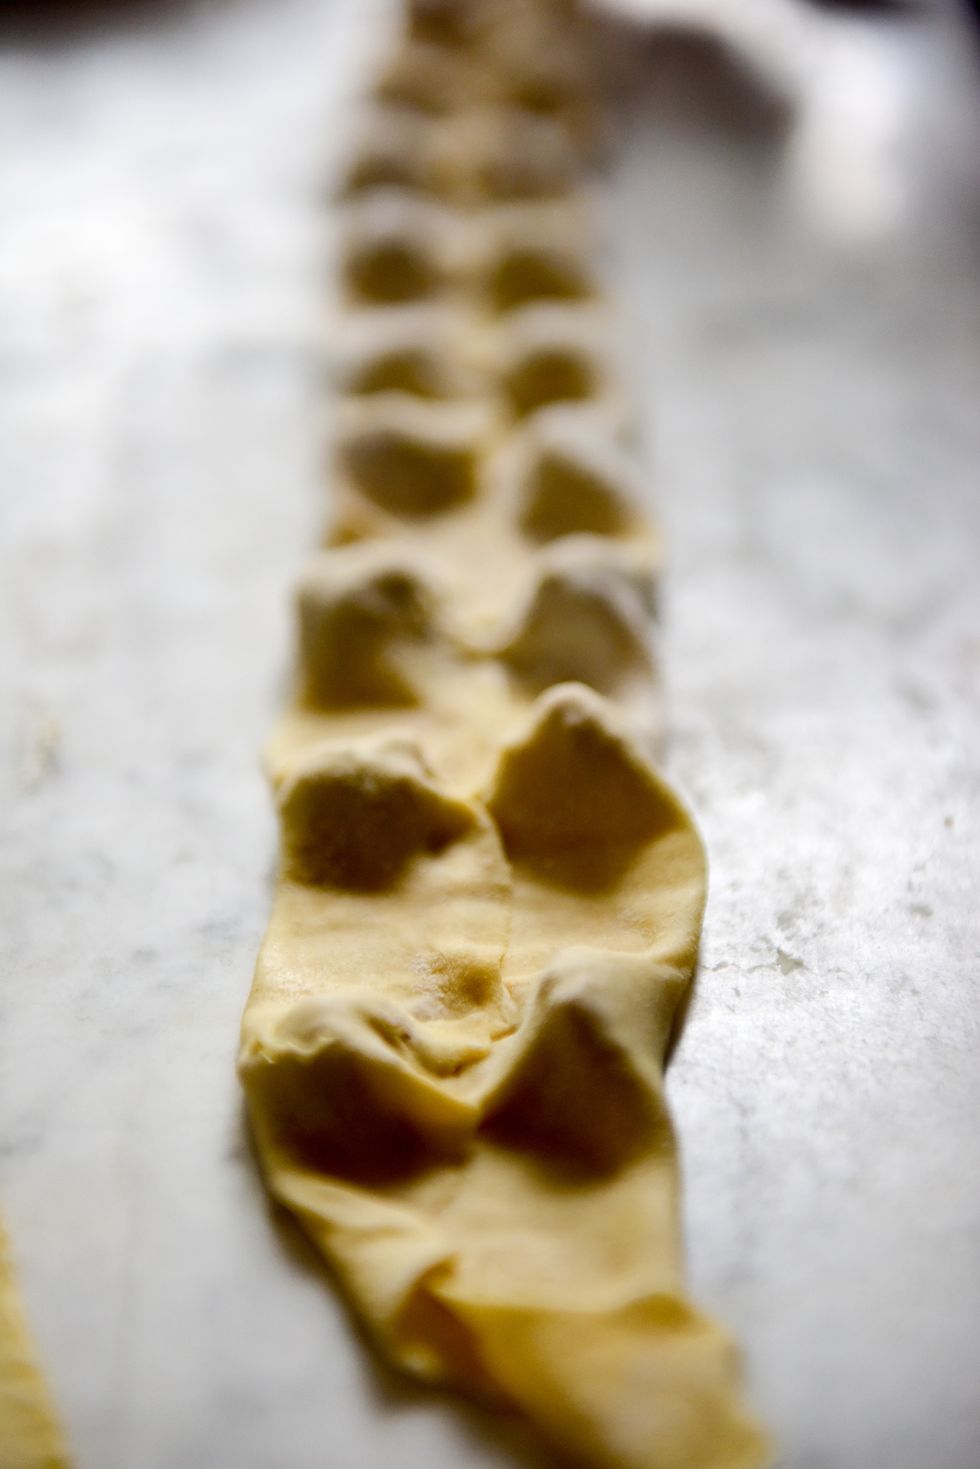 Small amounts of stuffing in a row on a fresh pasta sheet to make tortellini